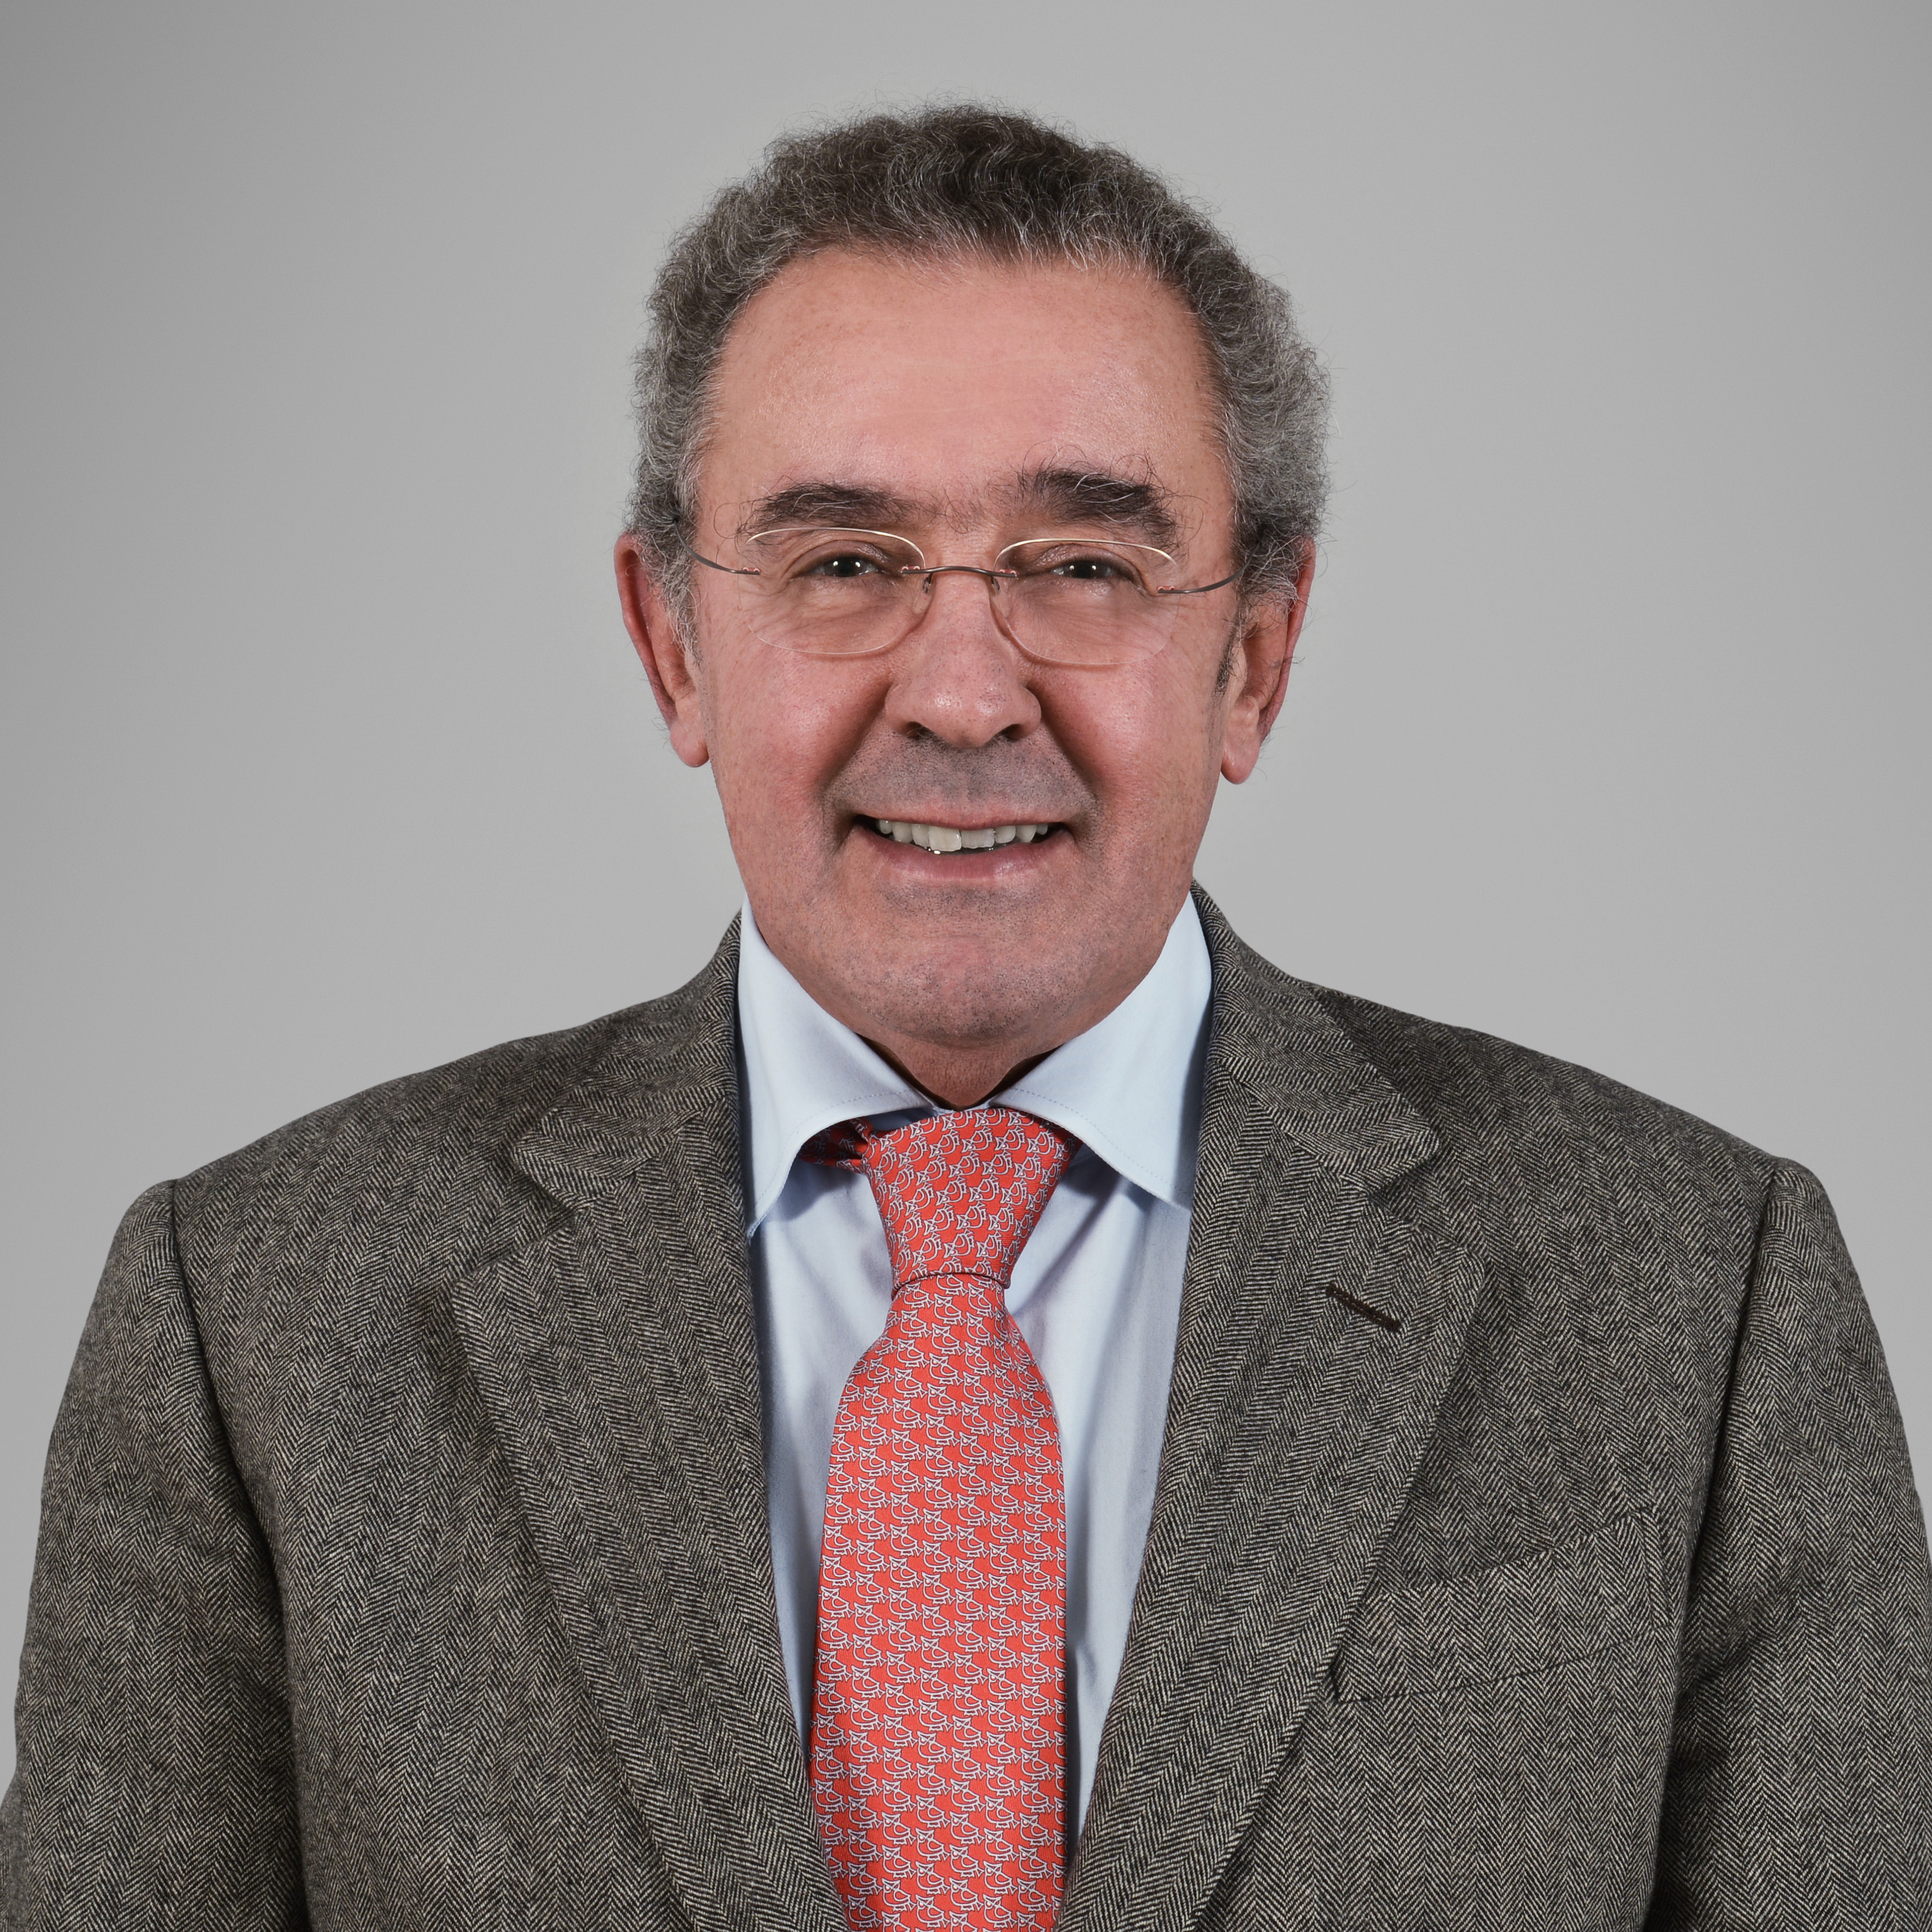 António Parreira, Clinical Director of the Champalimaud Clinical Centre